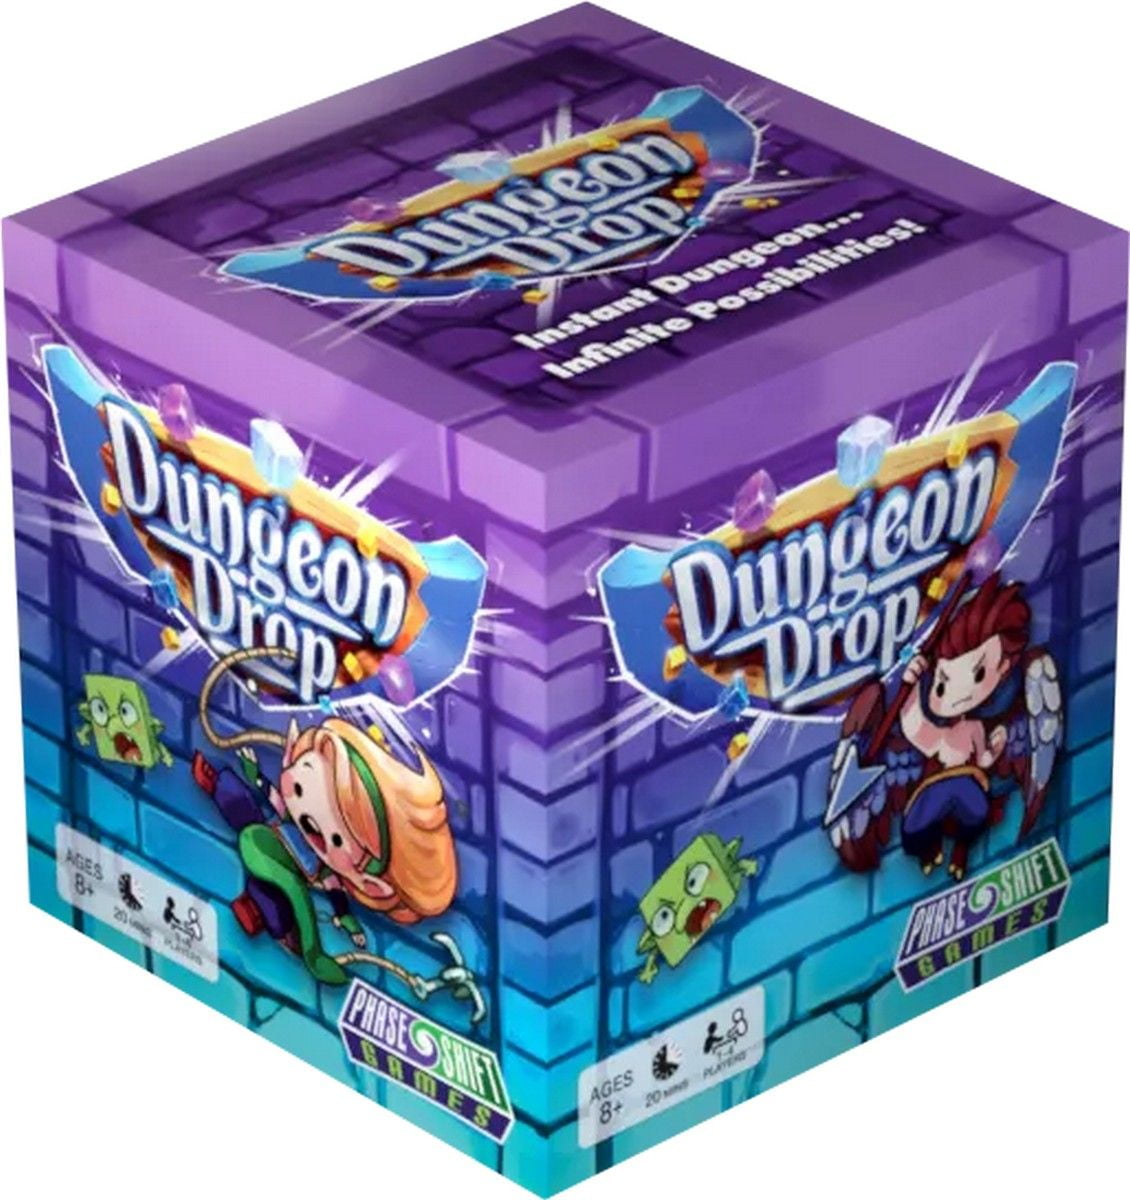 Dungeon Drop - 2nd Edition